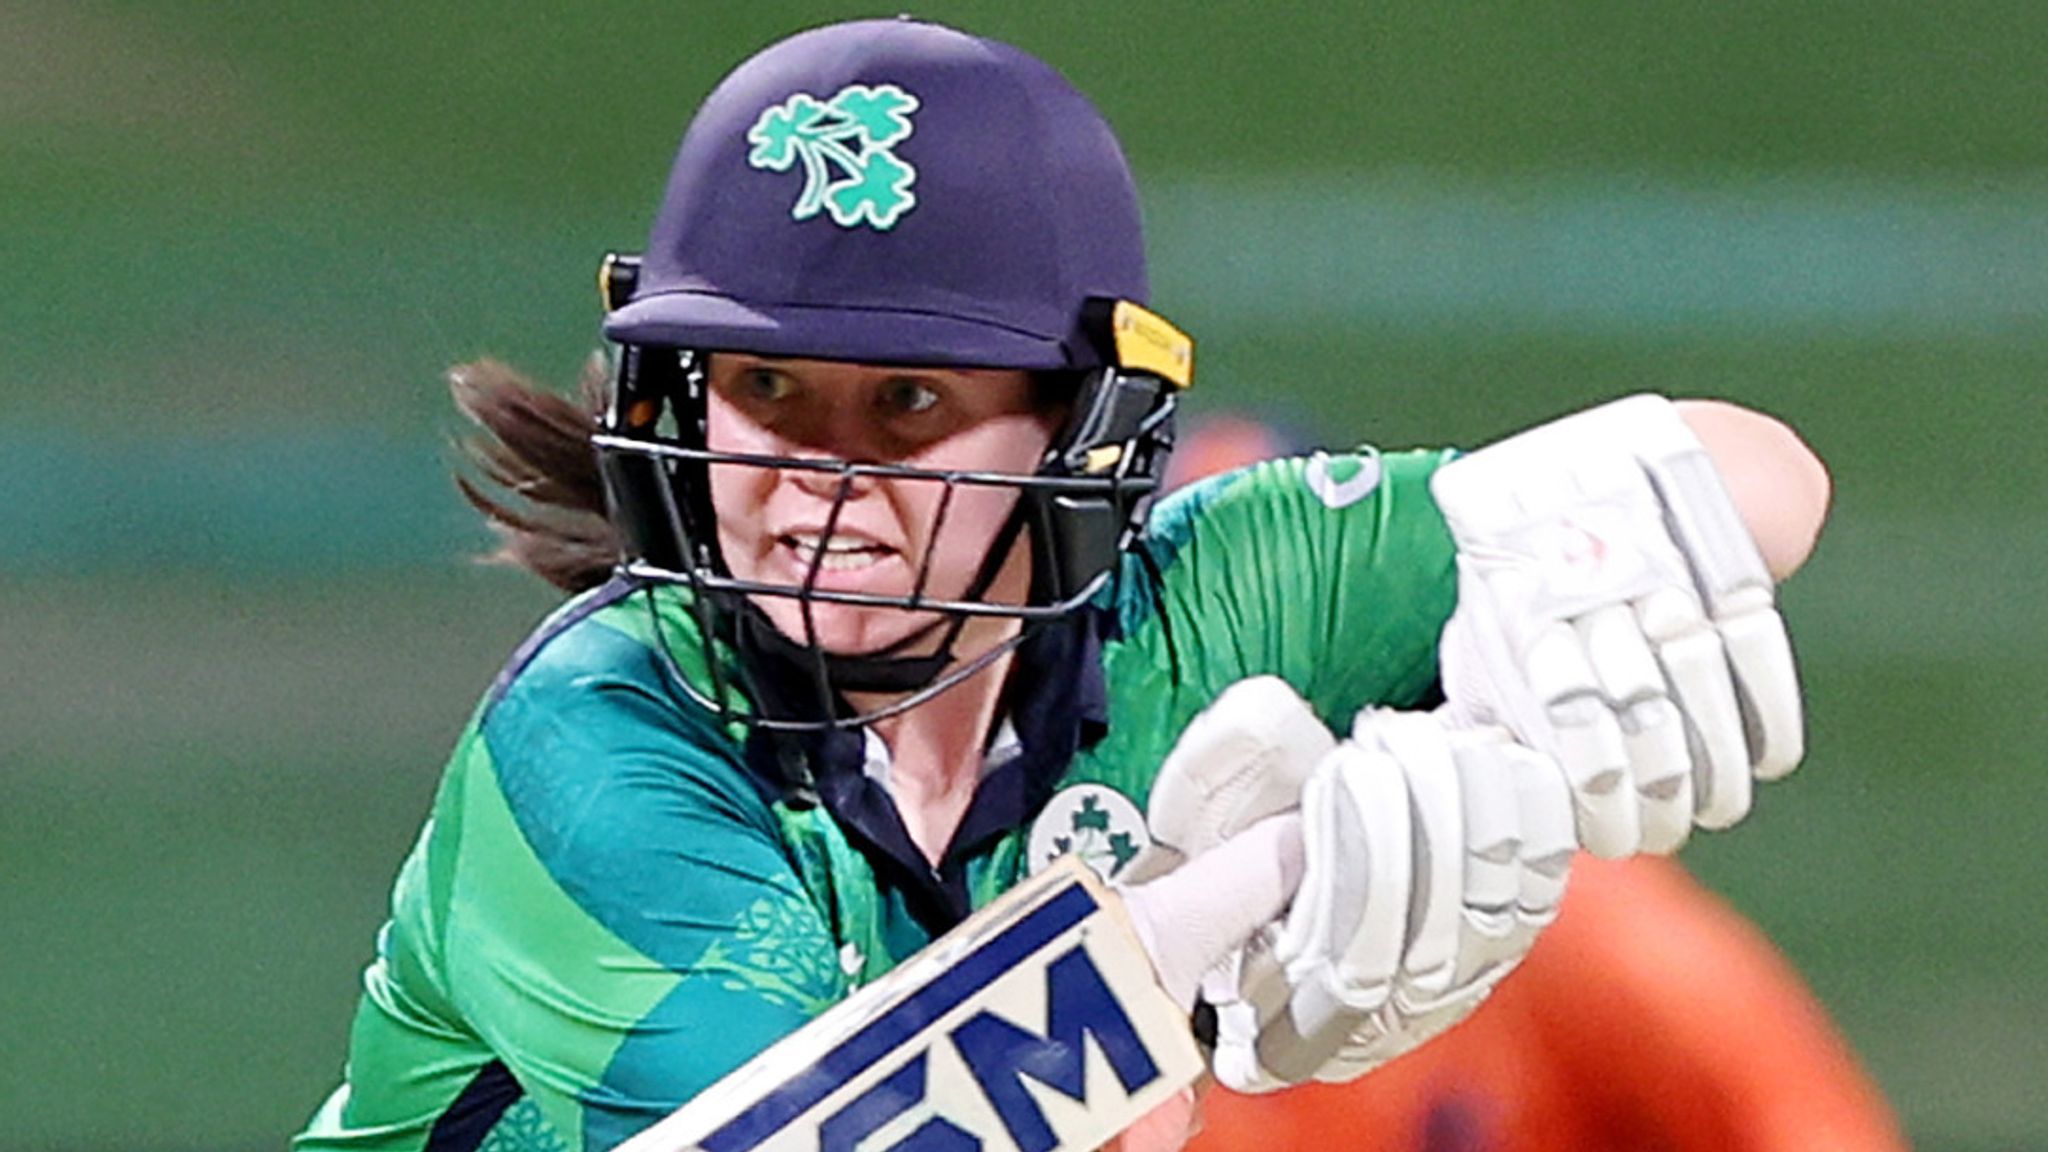 Women's T20 World Cup Ireland face Scotland with winners qualifying